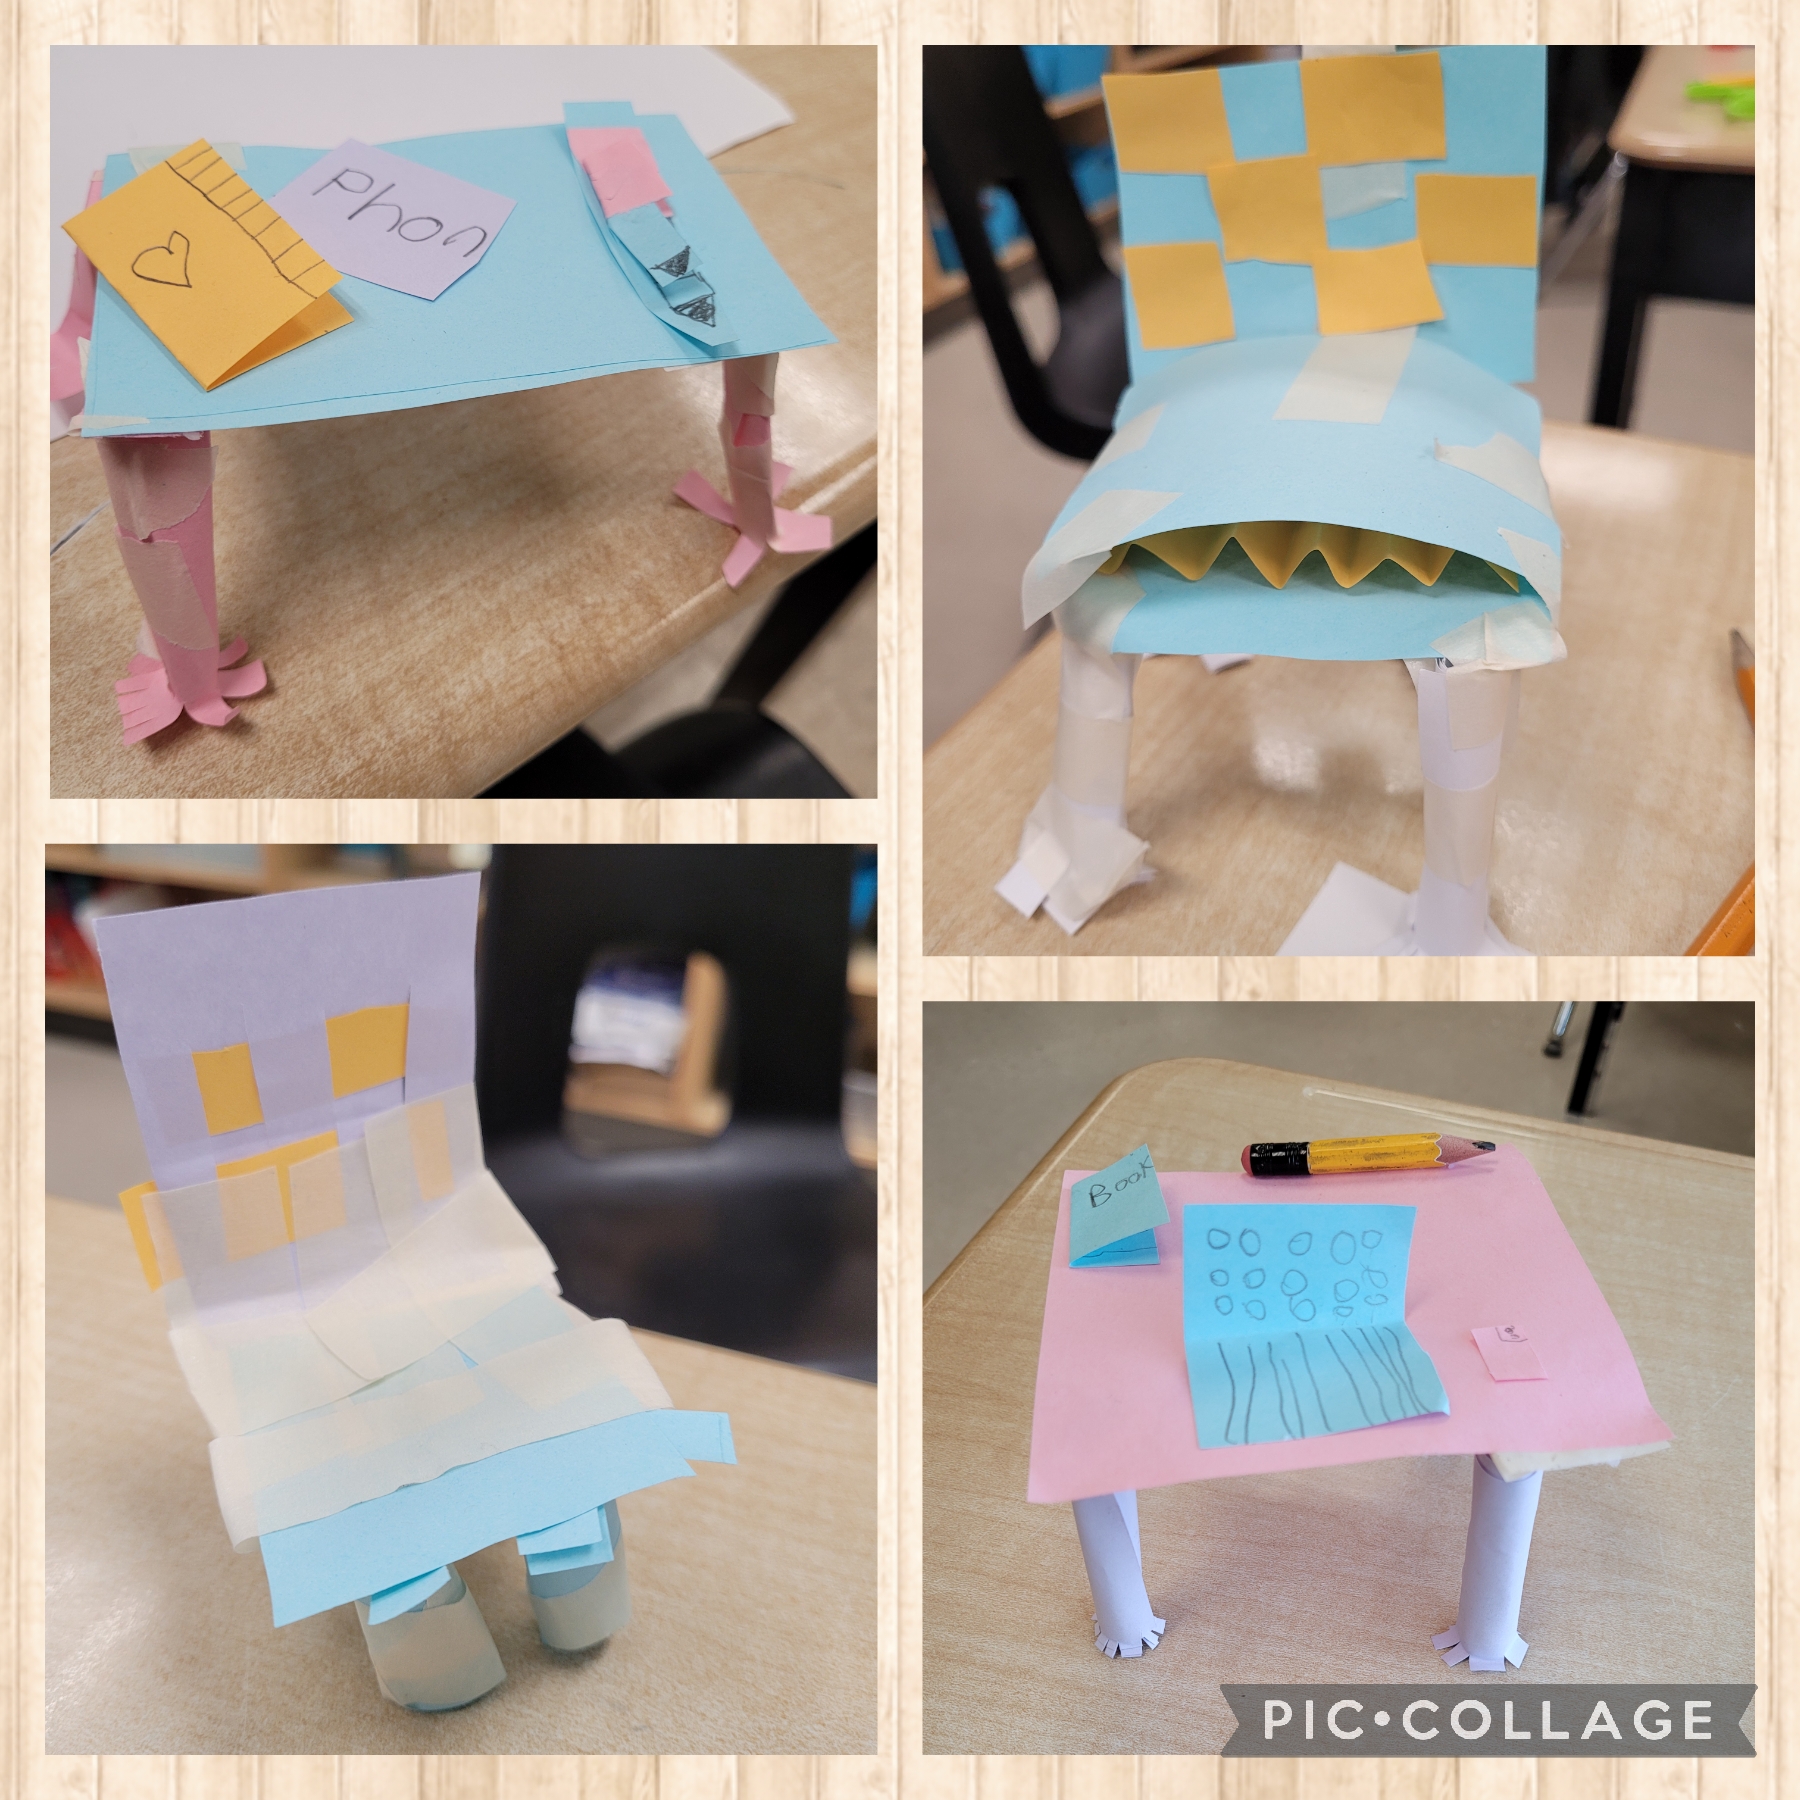 Picture Collage of Student Created Paper Structures